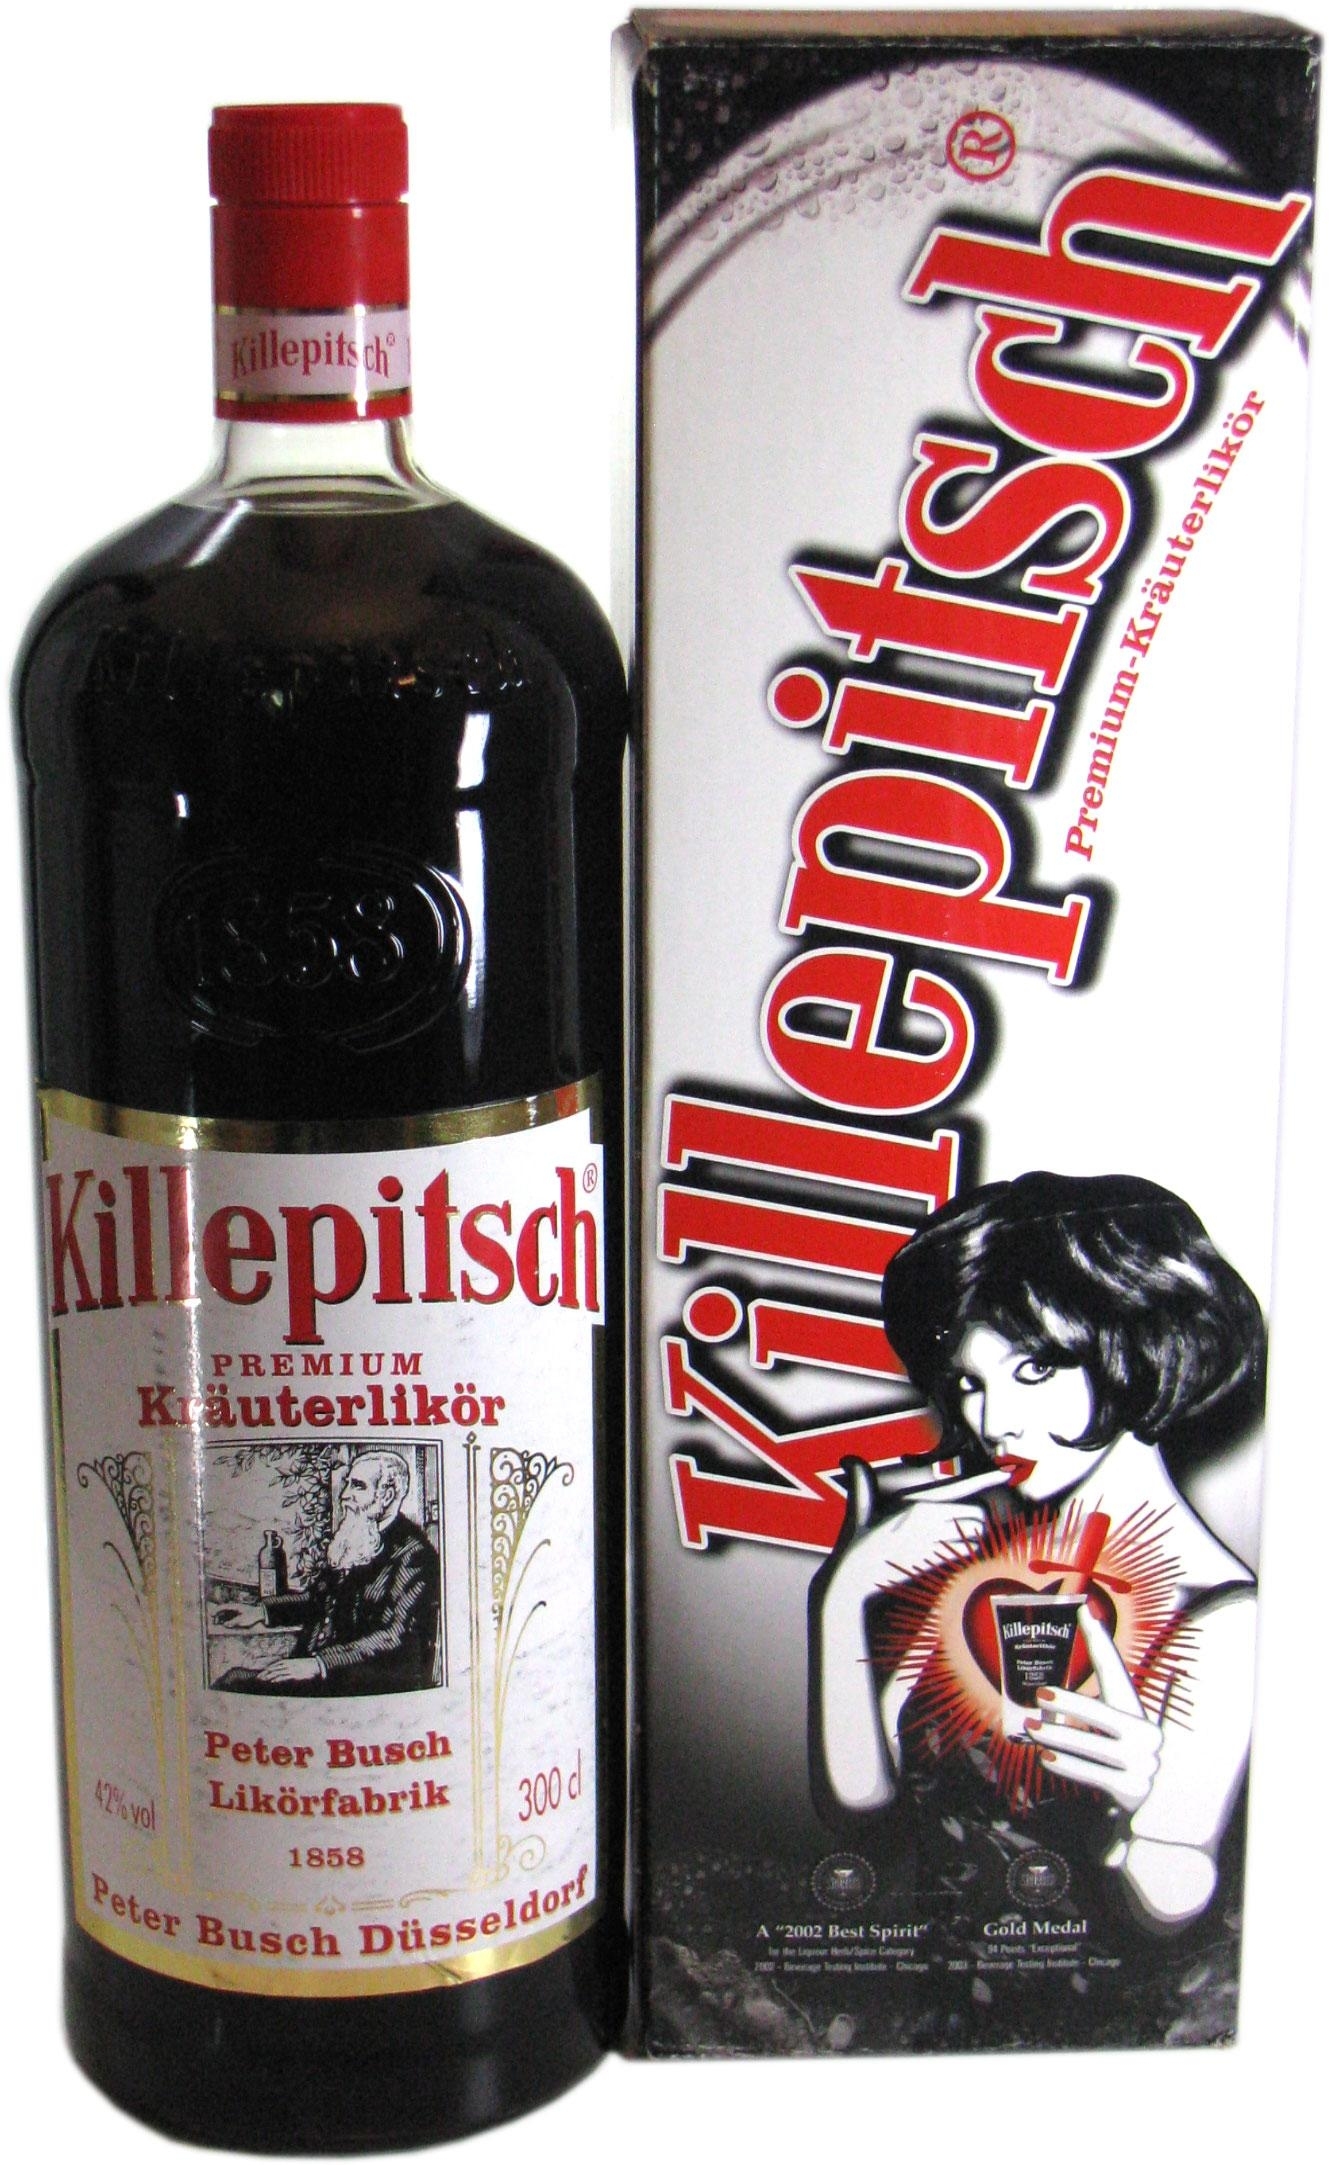 3.0l Germany</b><BR><BR>1 liqueur from = gift litre worldwidespirits EUR31.65 bottle box big herb | with b>Killepitsch -